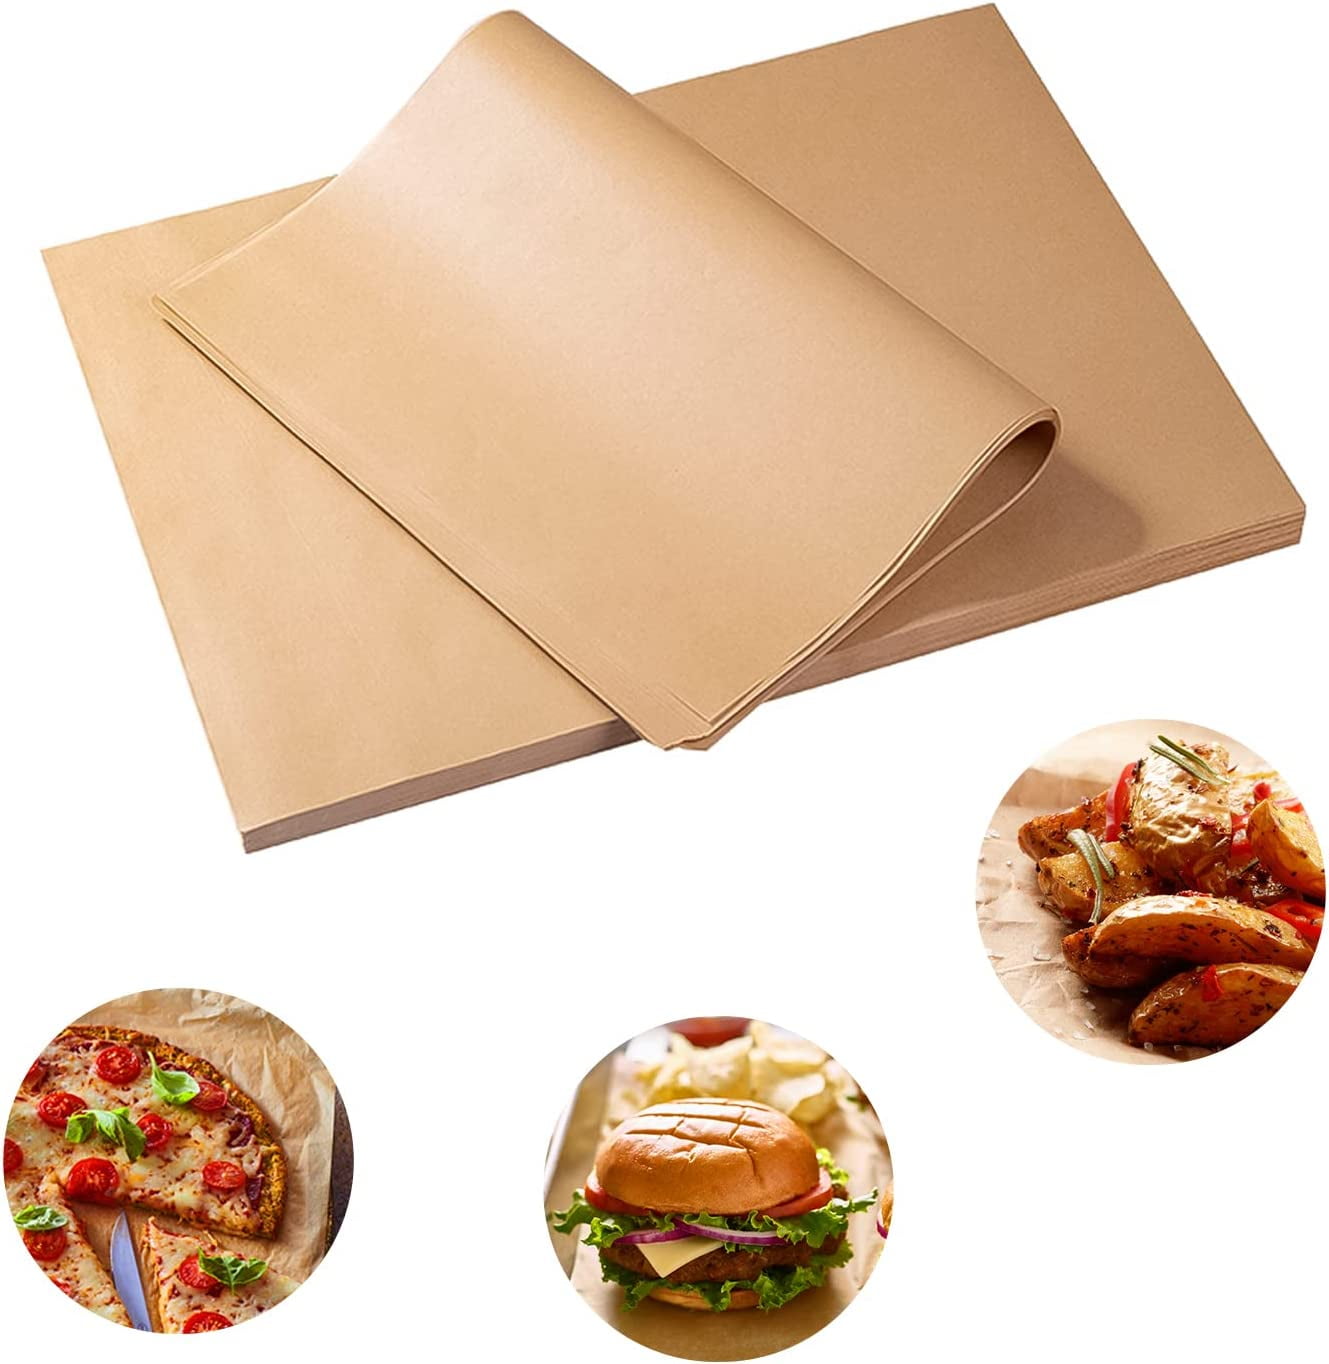 100-Piece Parchment Paper Baking Sheets 7.9x11.8 inch, Precut Non-Stick Parchment Sheets for Baking, Cooking, Grilling, Air Fryer and Steaming 